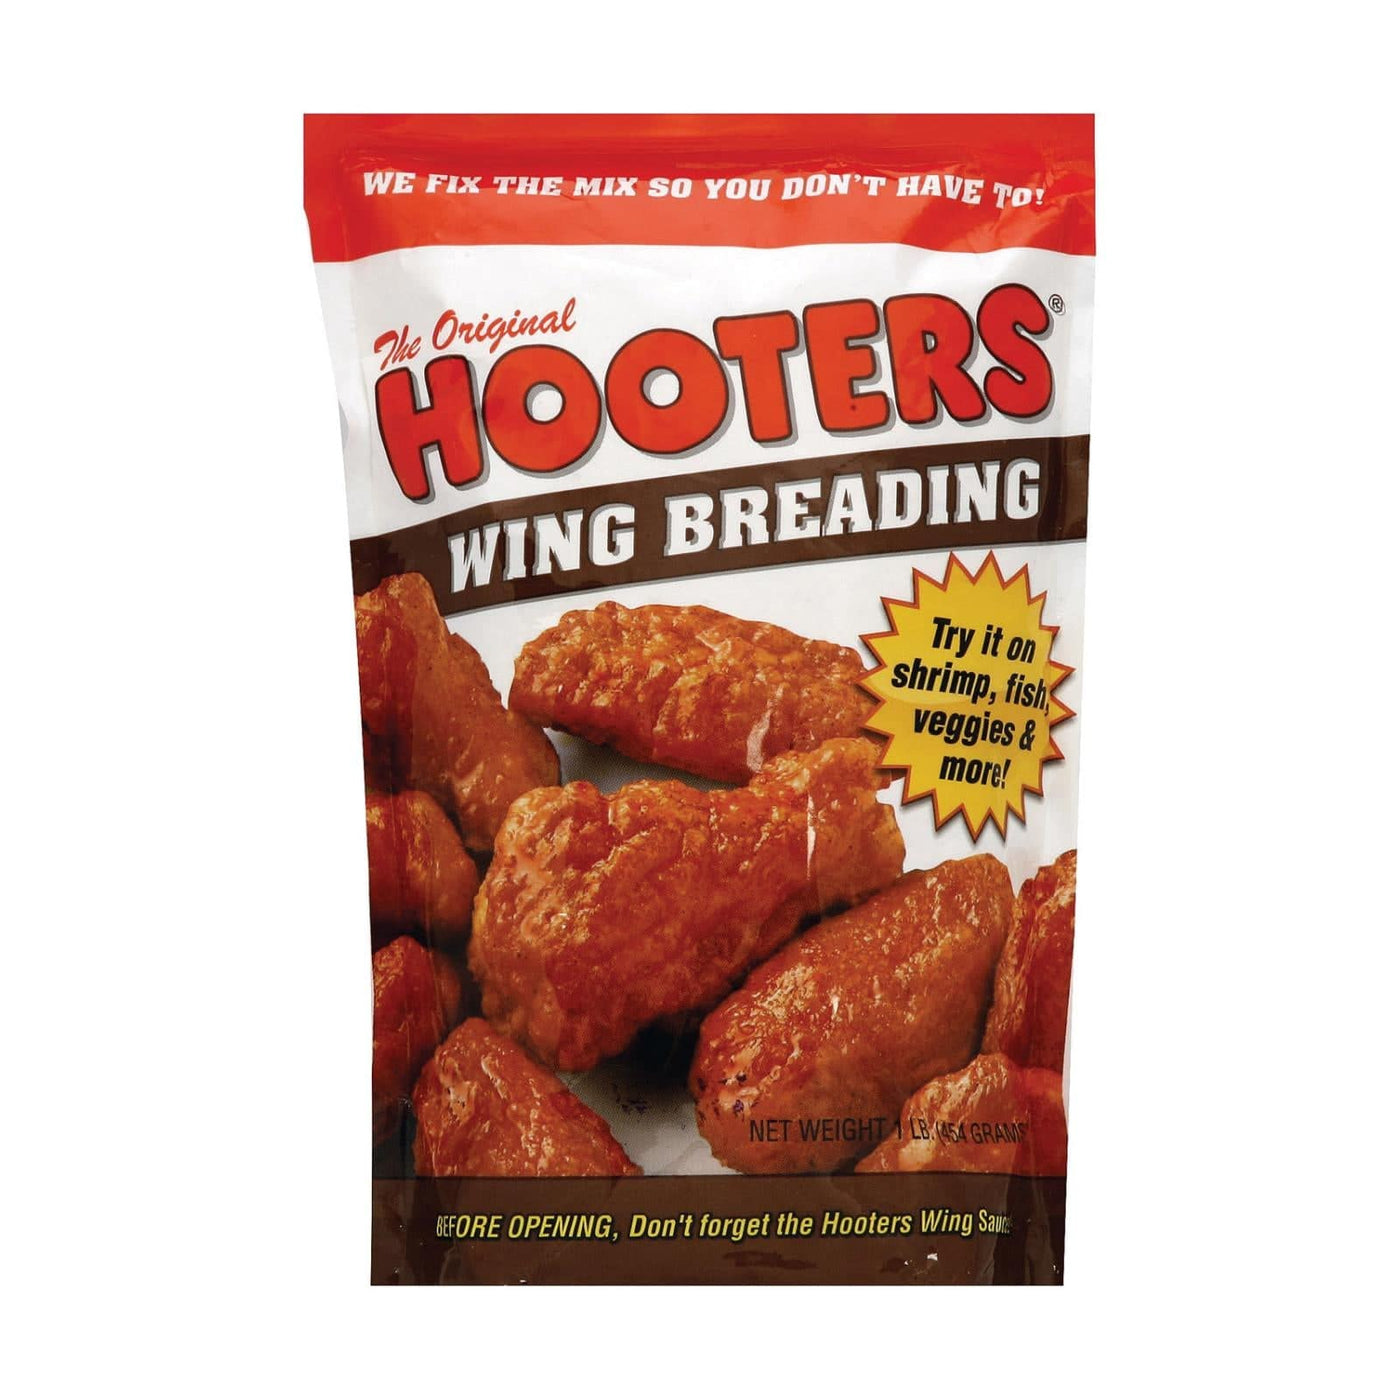 Hooters Mix - Breading - Case Of 6 - 1 Lb. | OnlyNaturals.us